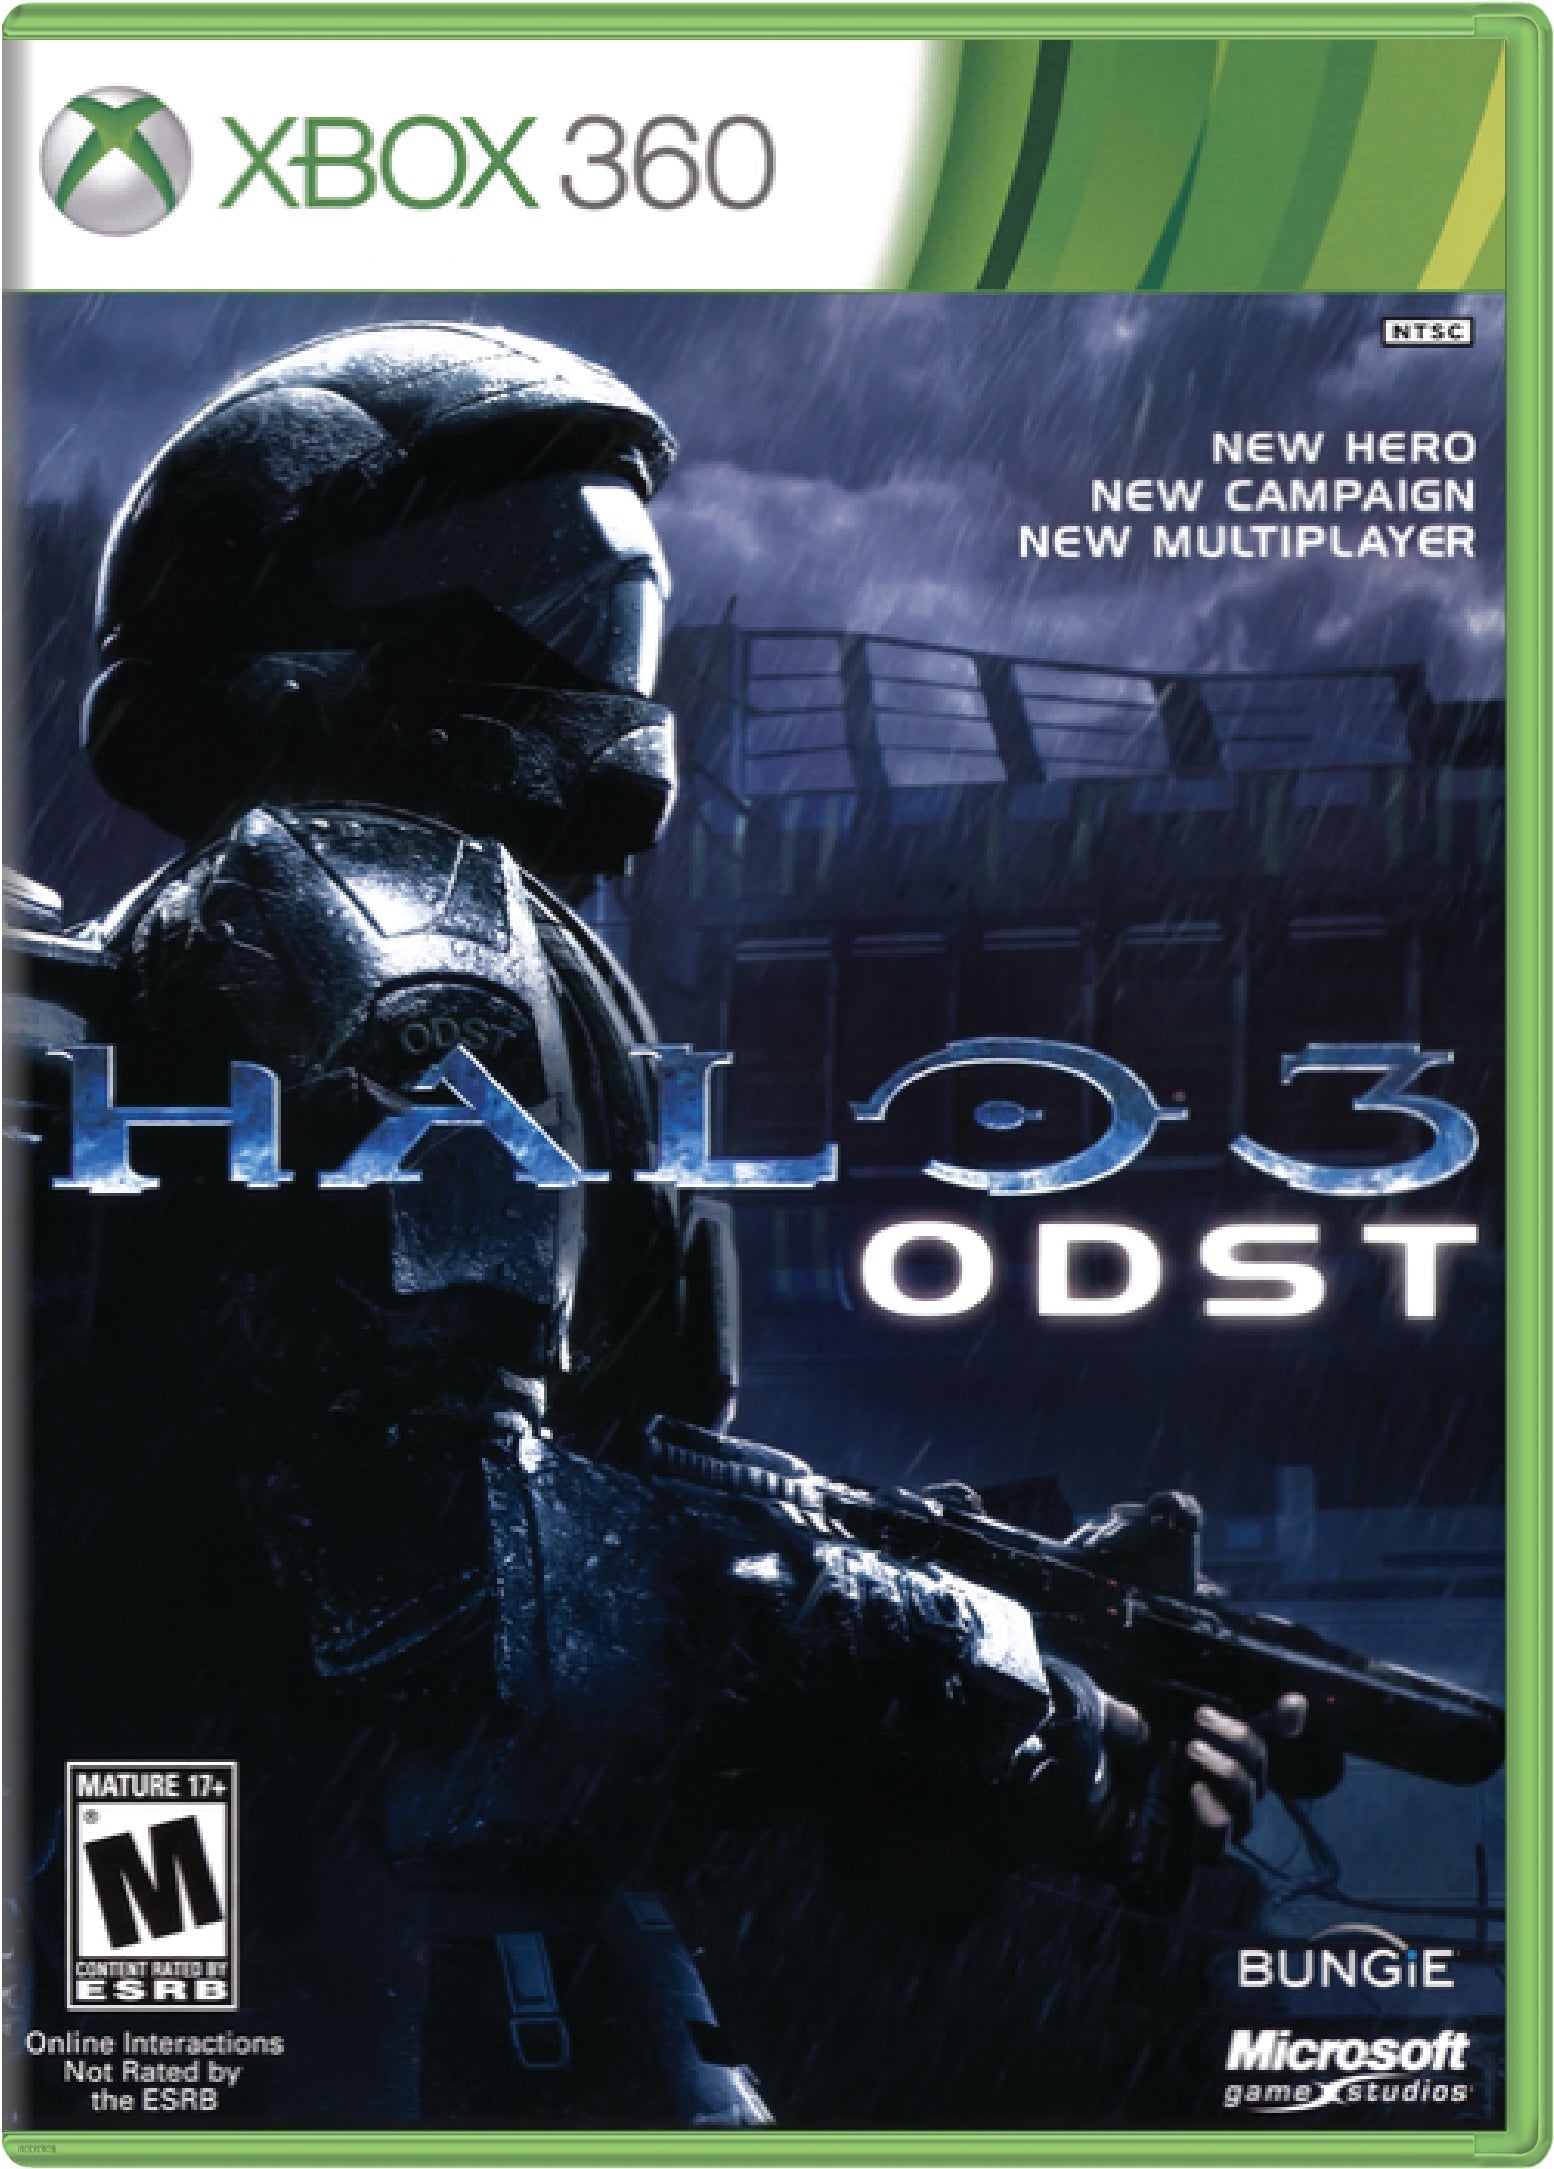 Halo 3 ODST Cover Art